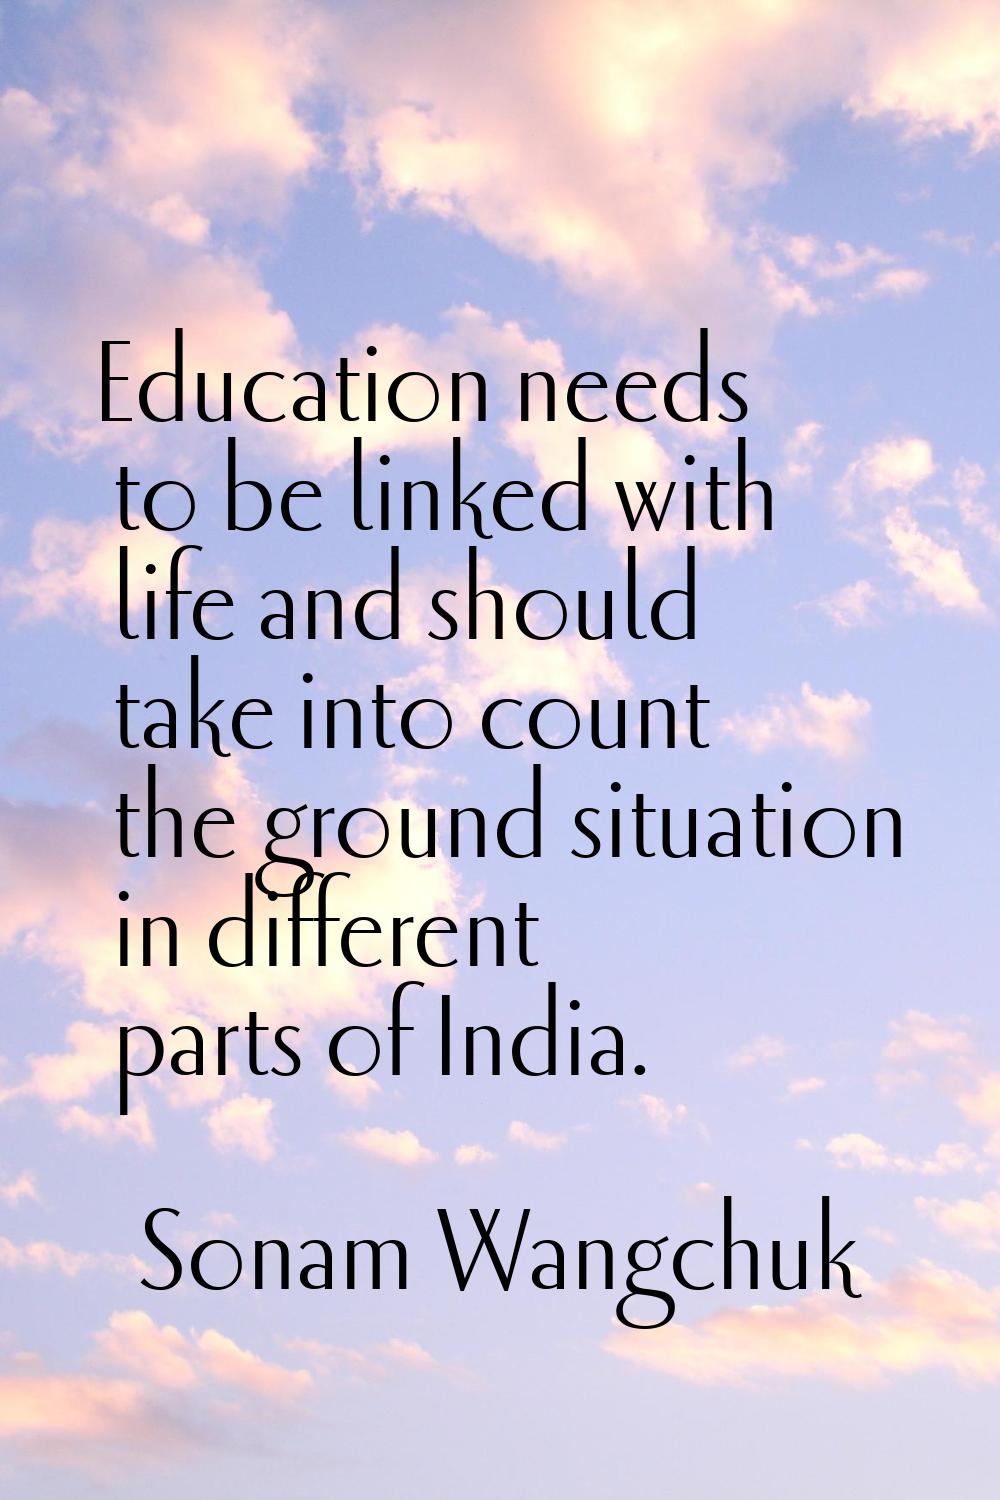 Education needs to be linked with life and should take into count the ground situation in different